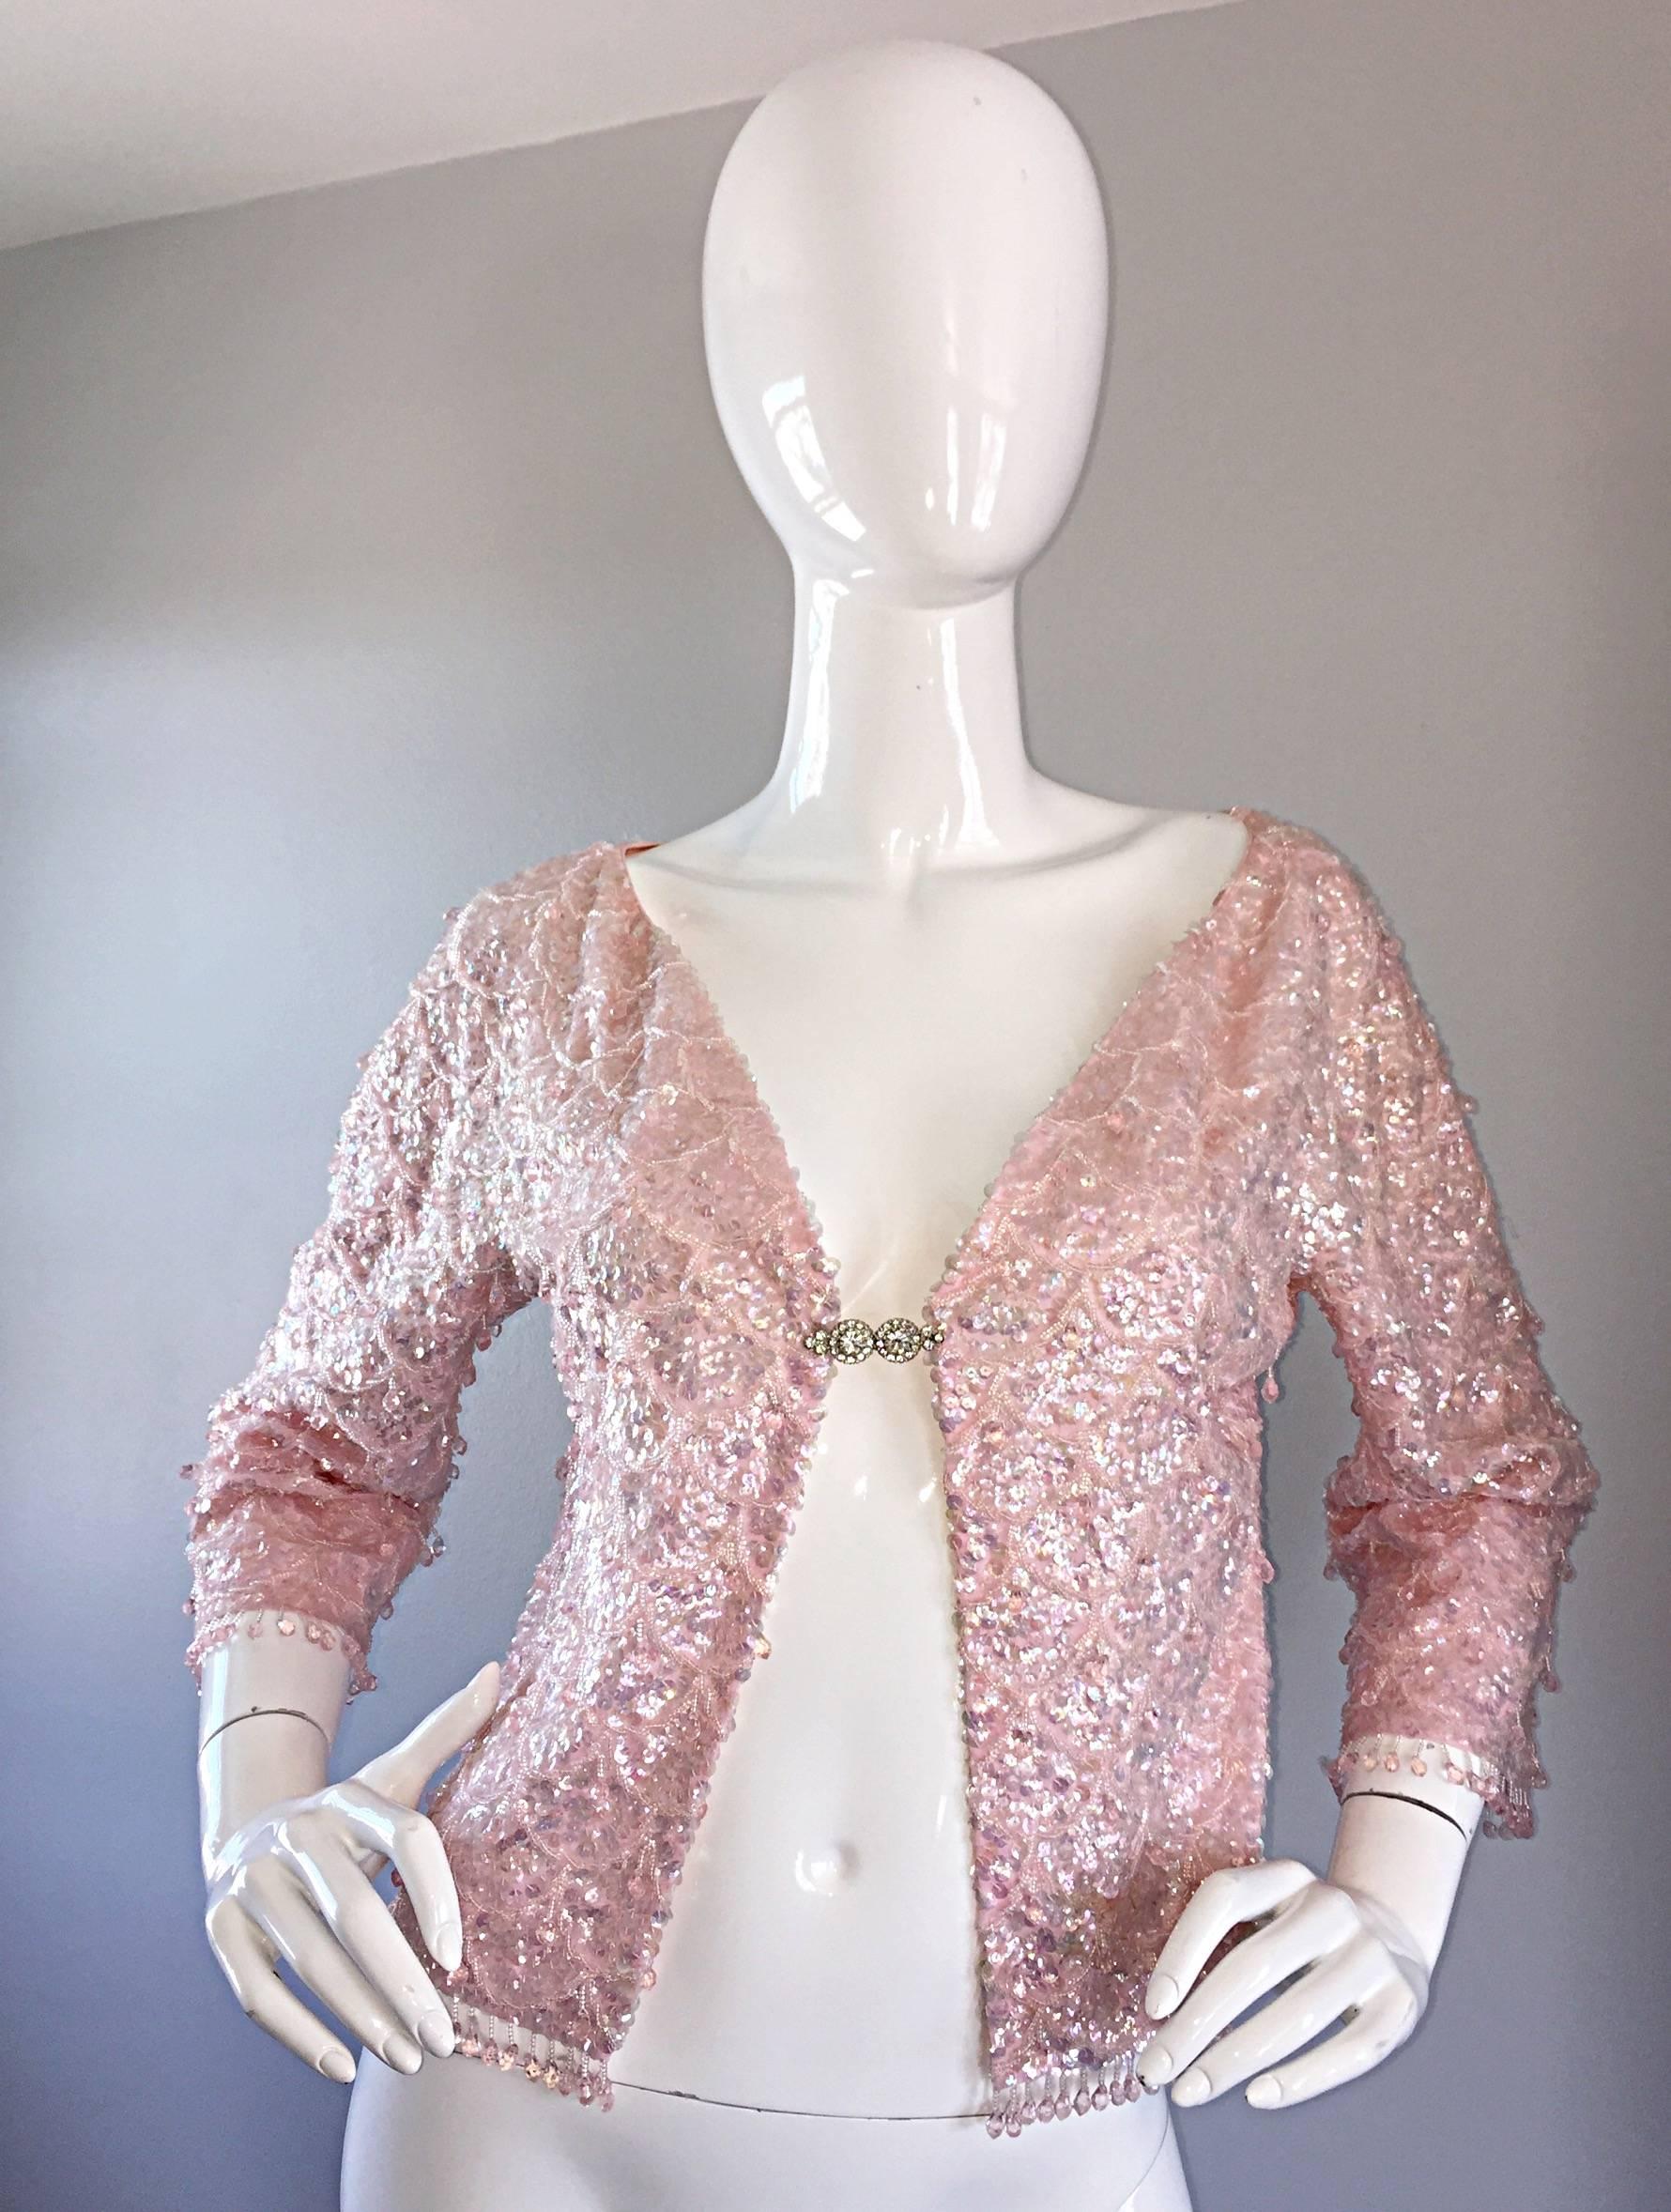 Prettiest vintage 50s light pink silk sequined and beaded jacket cardigan. Features all over hand sewn sequins and beads. Dangling pink beads throughout, and at the hem, and sleeve cuffs. Rhinestone clasp at bust. Can easily be dressed up or down.